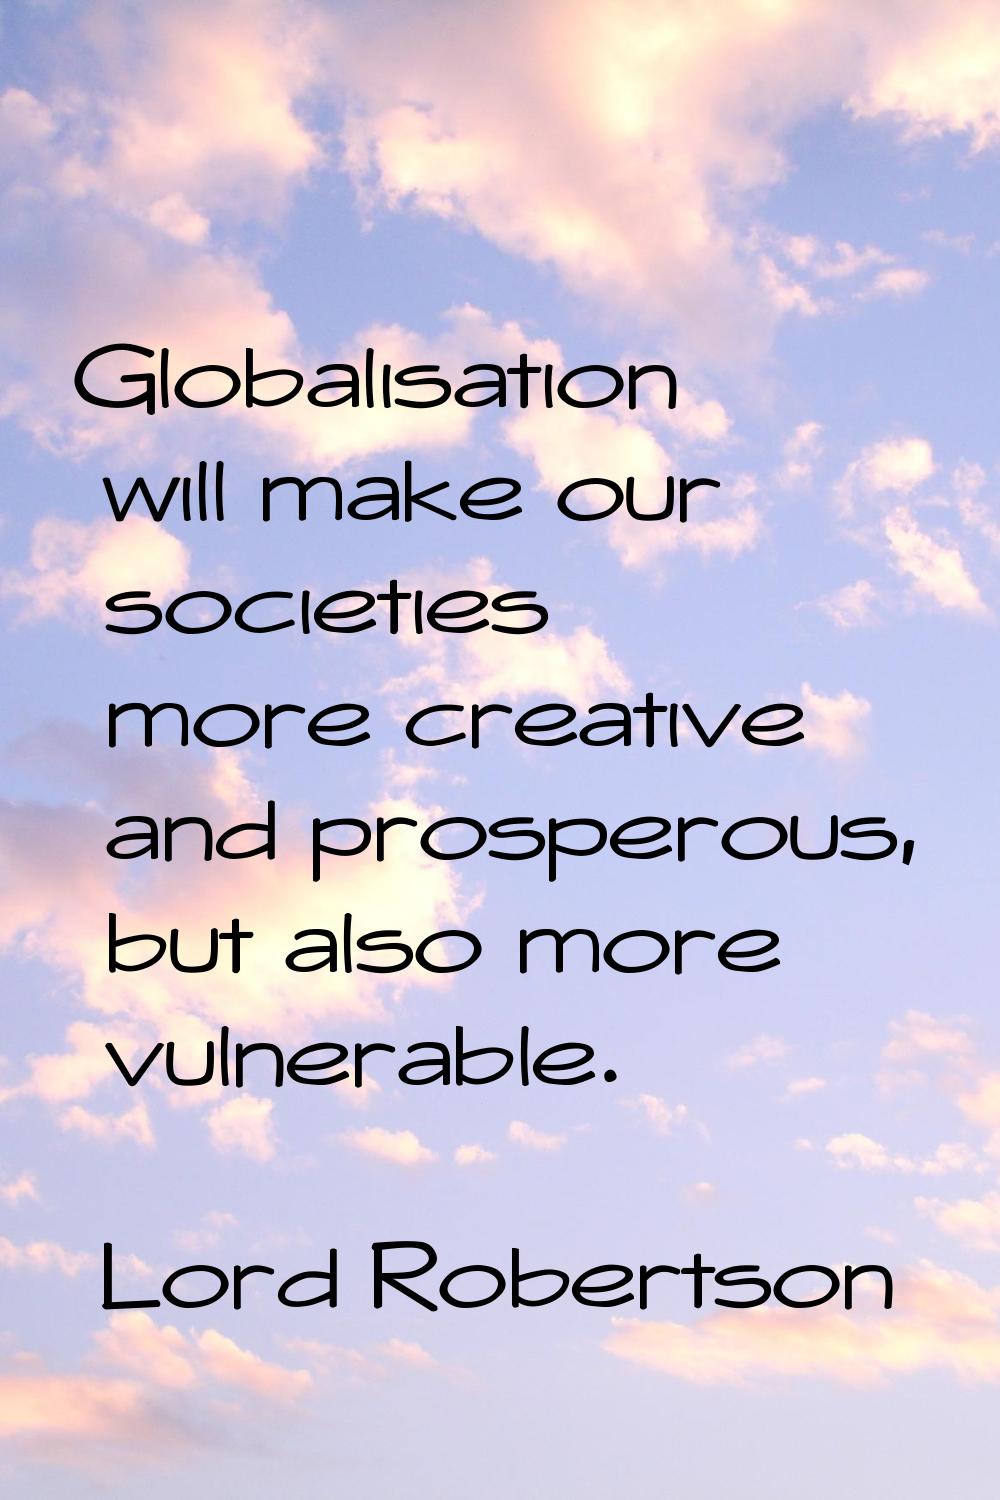 Globalisation will make our societies more creative and prosperous, but also more vulnerable.